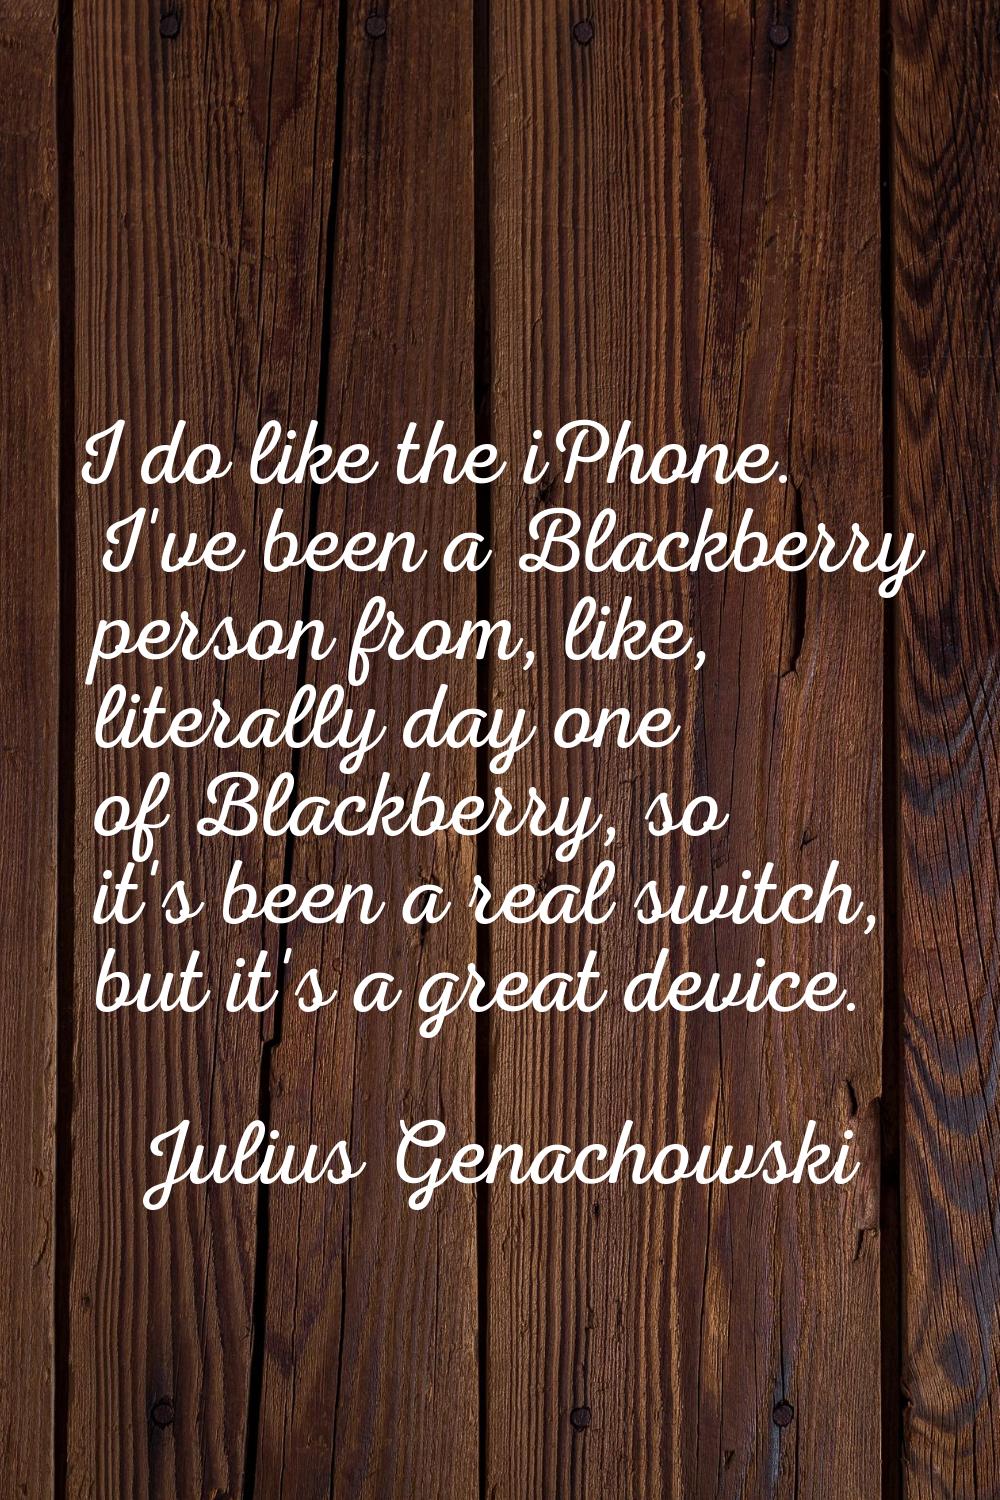 I do like the iPhone. I've been a Blackberry person from, like, literally day one of Blackberry, so